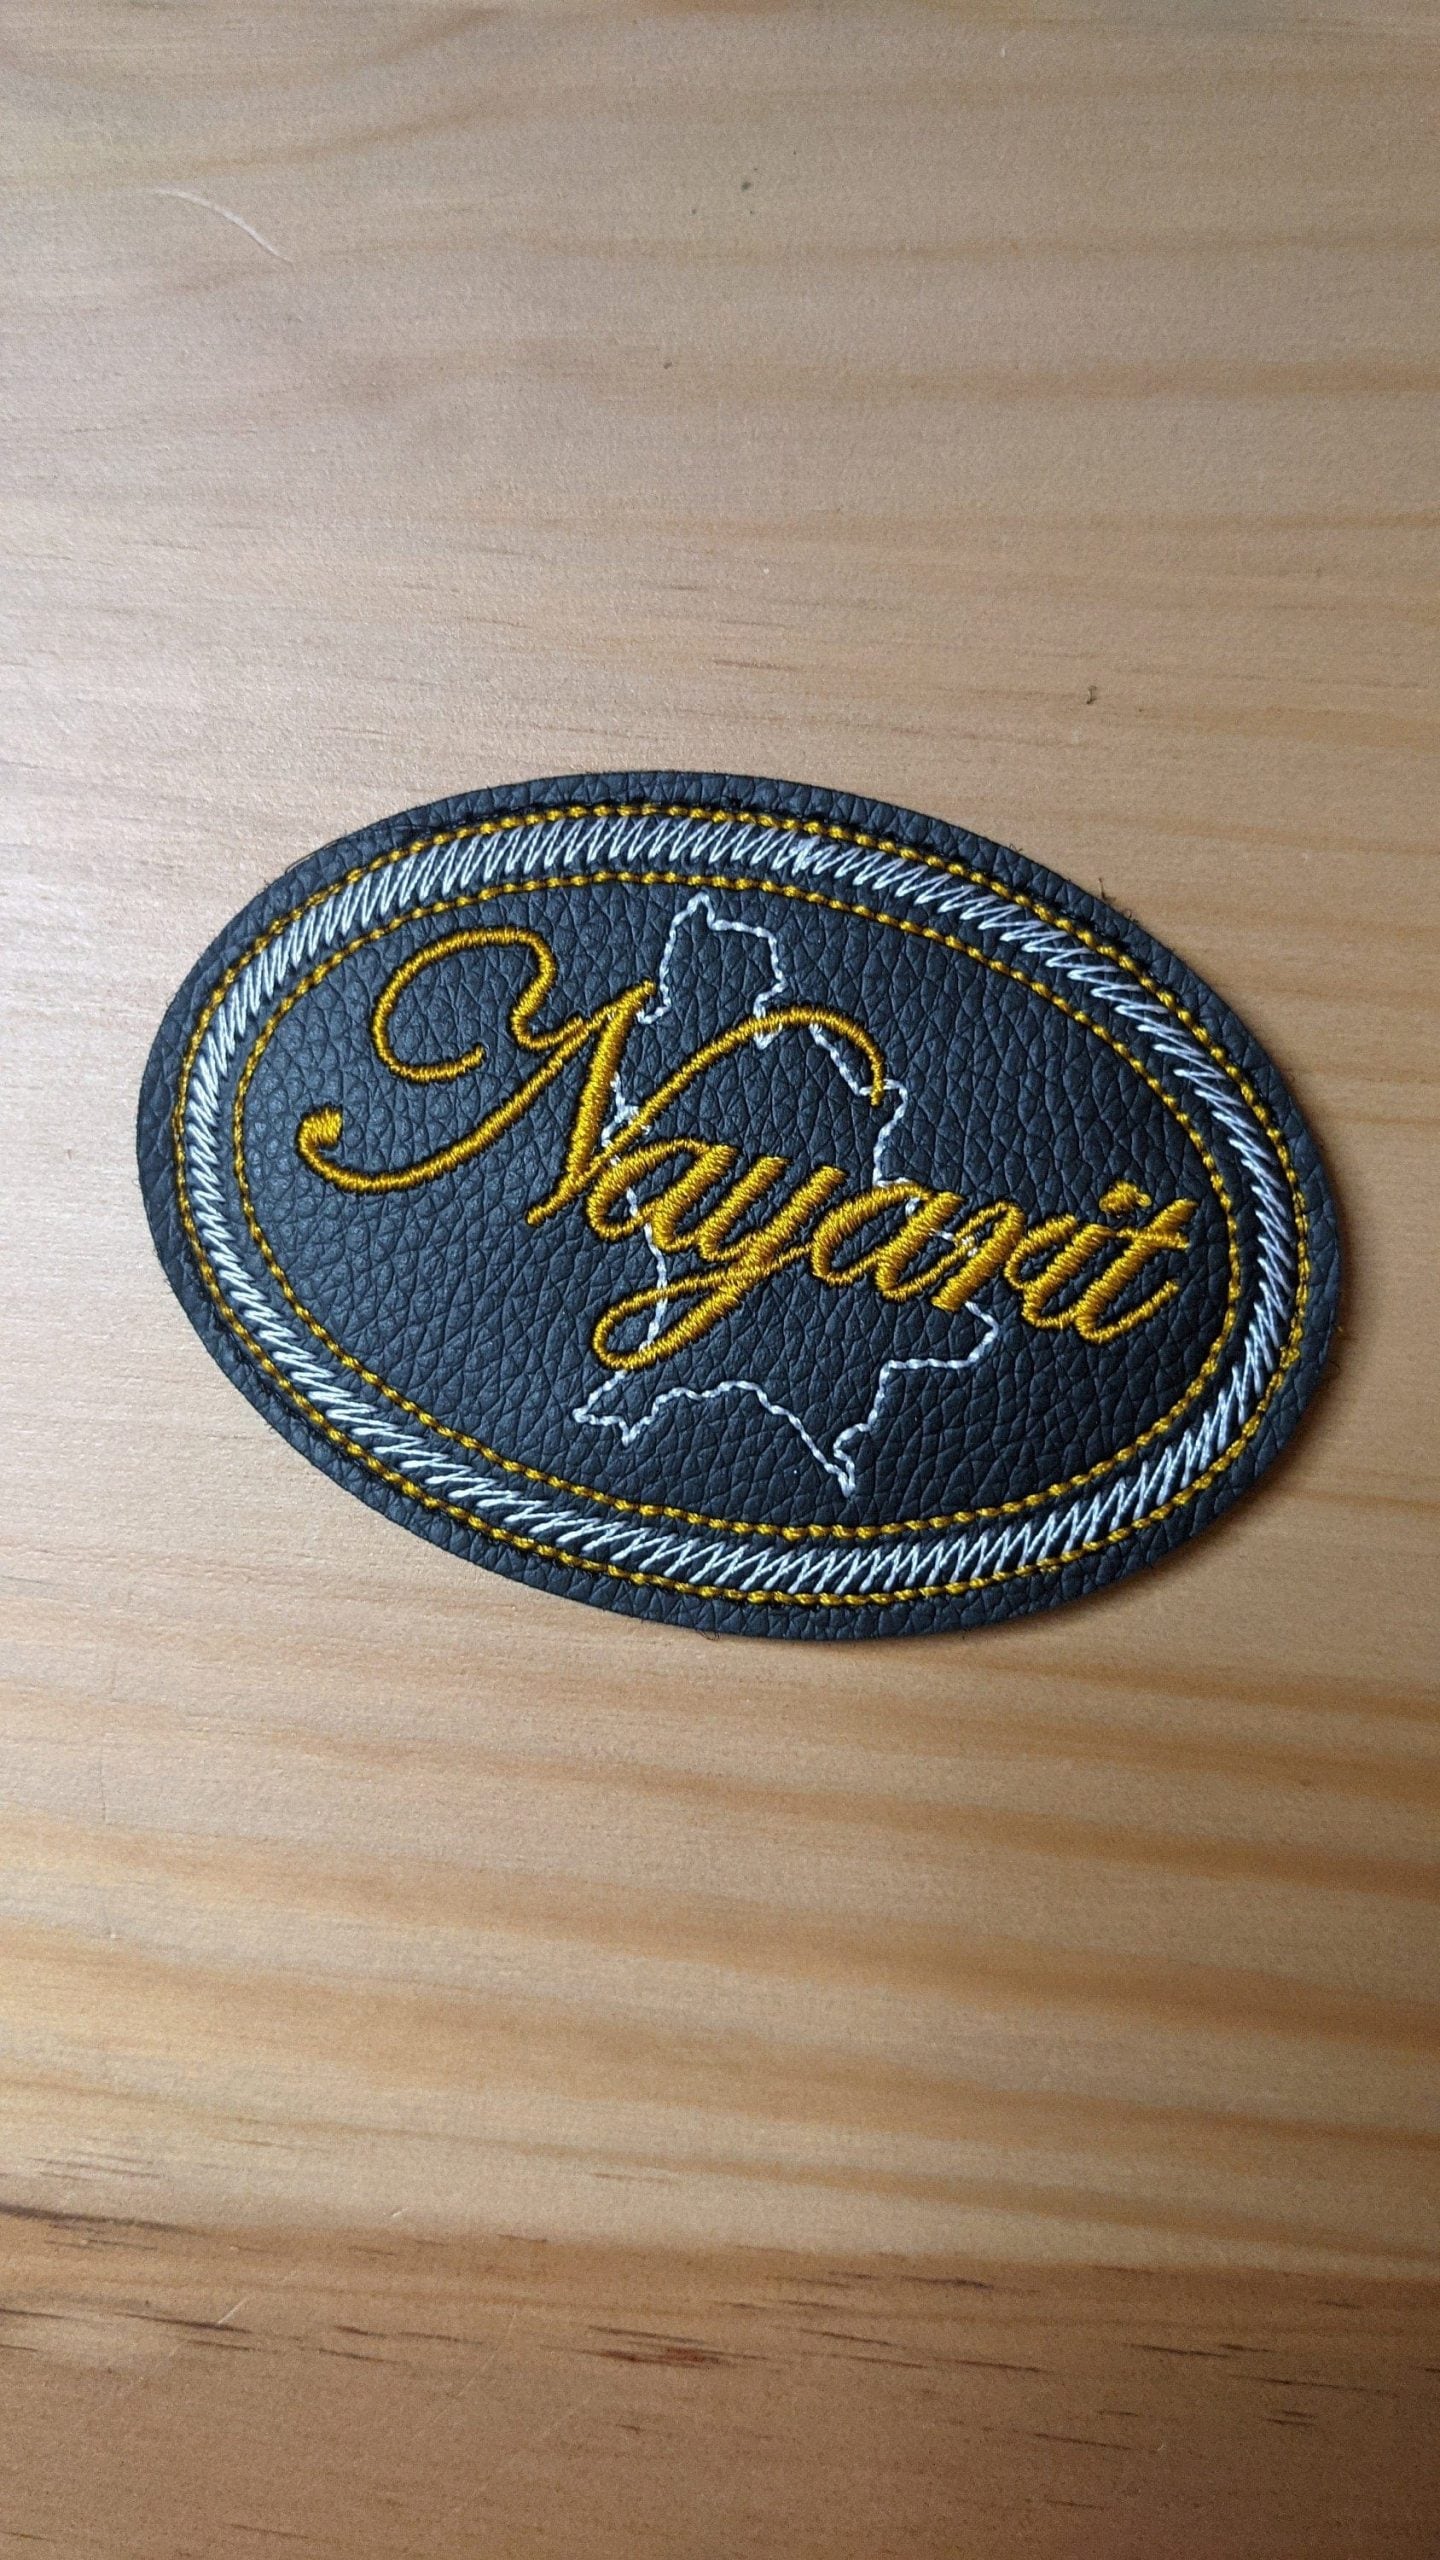 Nayarit Mexico Embroidered iron on patch for hats and jacket etc